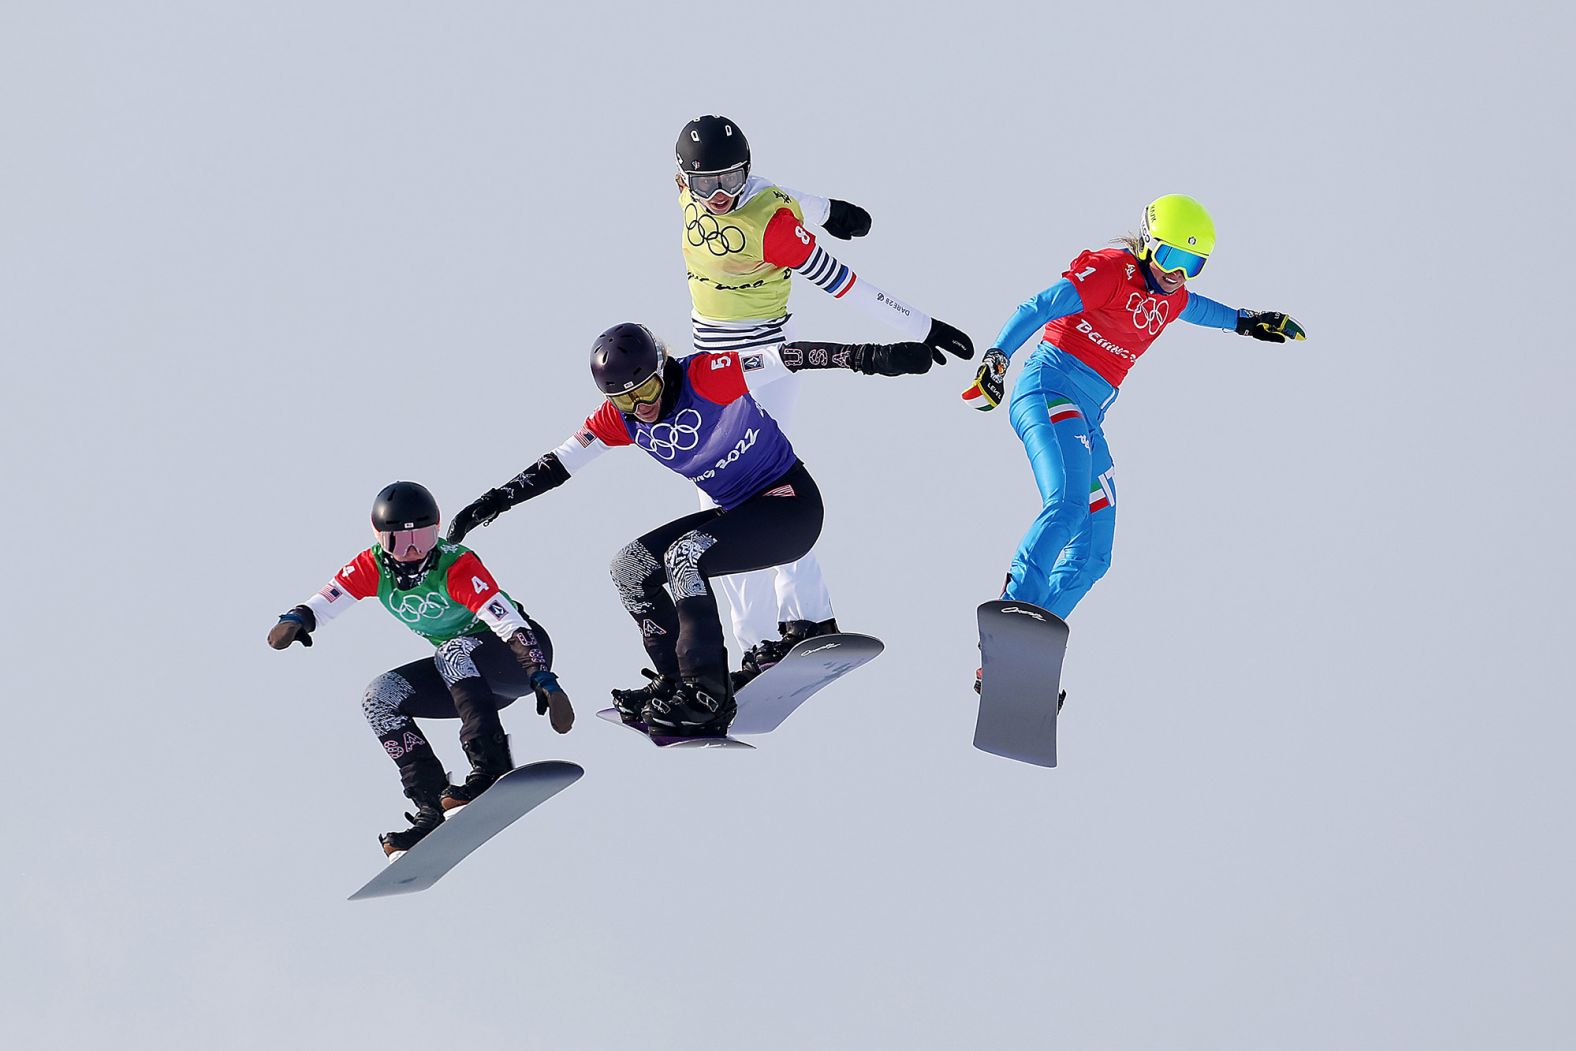 From left, the United States' Stacy Gaskill, the United States' Lindsey Jacobellis, France's Chloe Trespeuch and Italy's Michela Moioli compete in a snowboard cross semifinal on February 9. <a href="https://www.cnn.com/world/live-news/beijing-winter-olympics-02-09-22-spt/h_9fa28ffc70374c24fcb050dd588b6eed" target="_blank">Jacobellis would go on to win the event,</a> her first gold medal in her fifth Olympic Games.